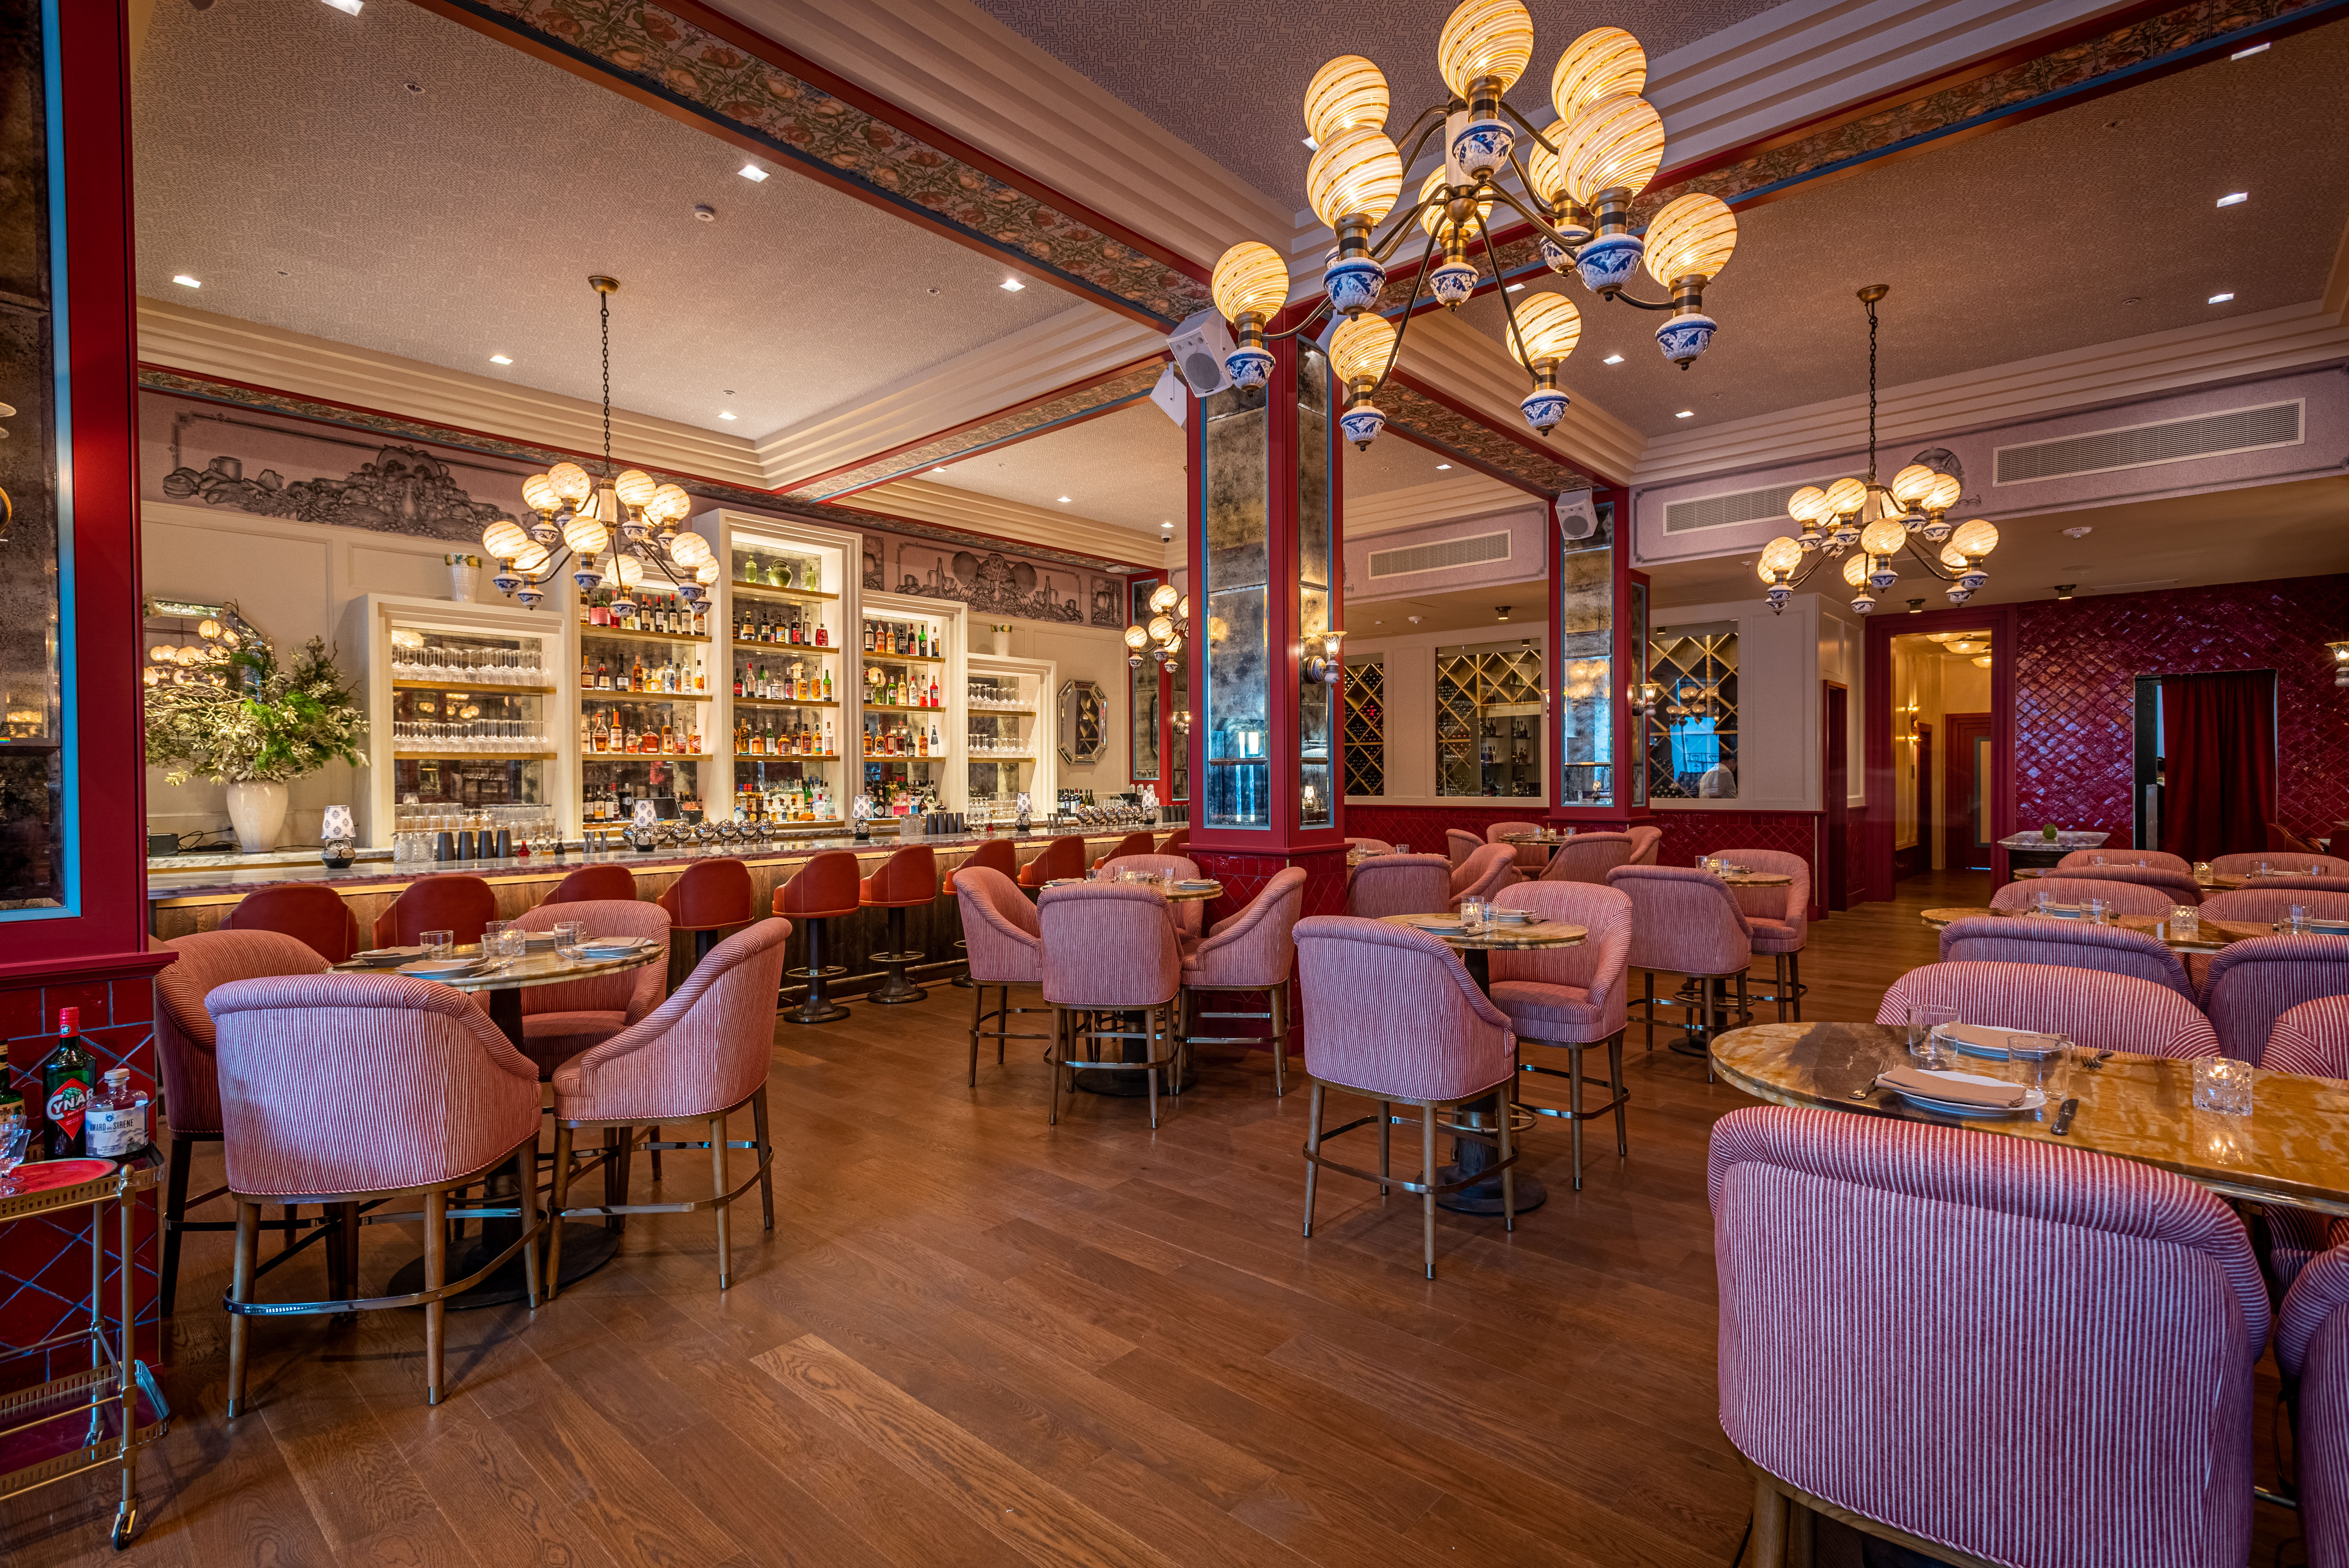 A wide view of a new Italian restaurant with red tones and vintage lighting.